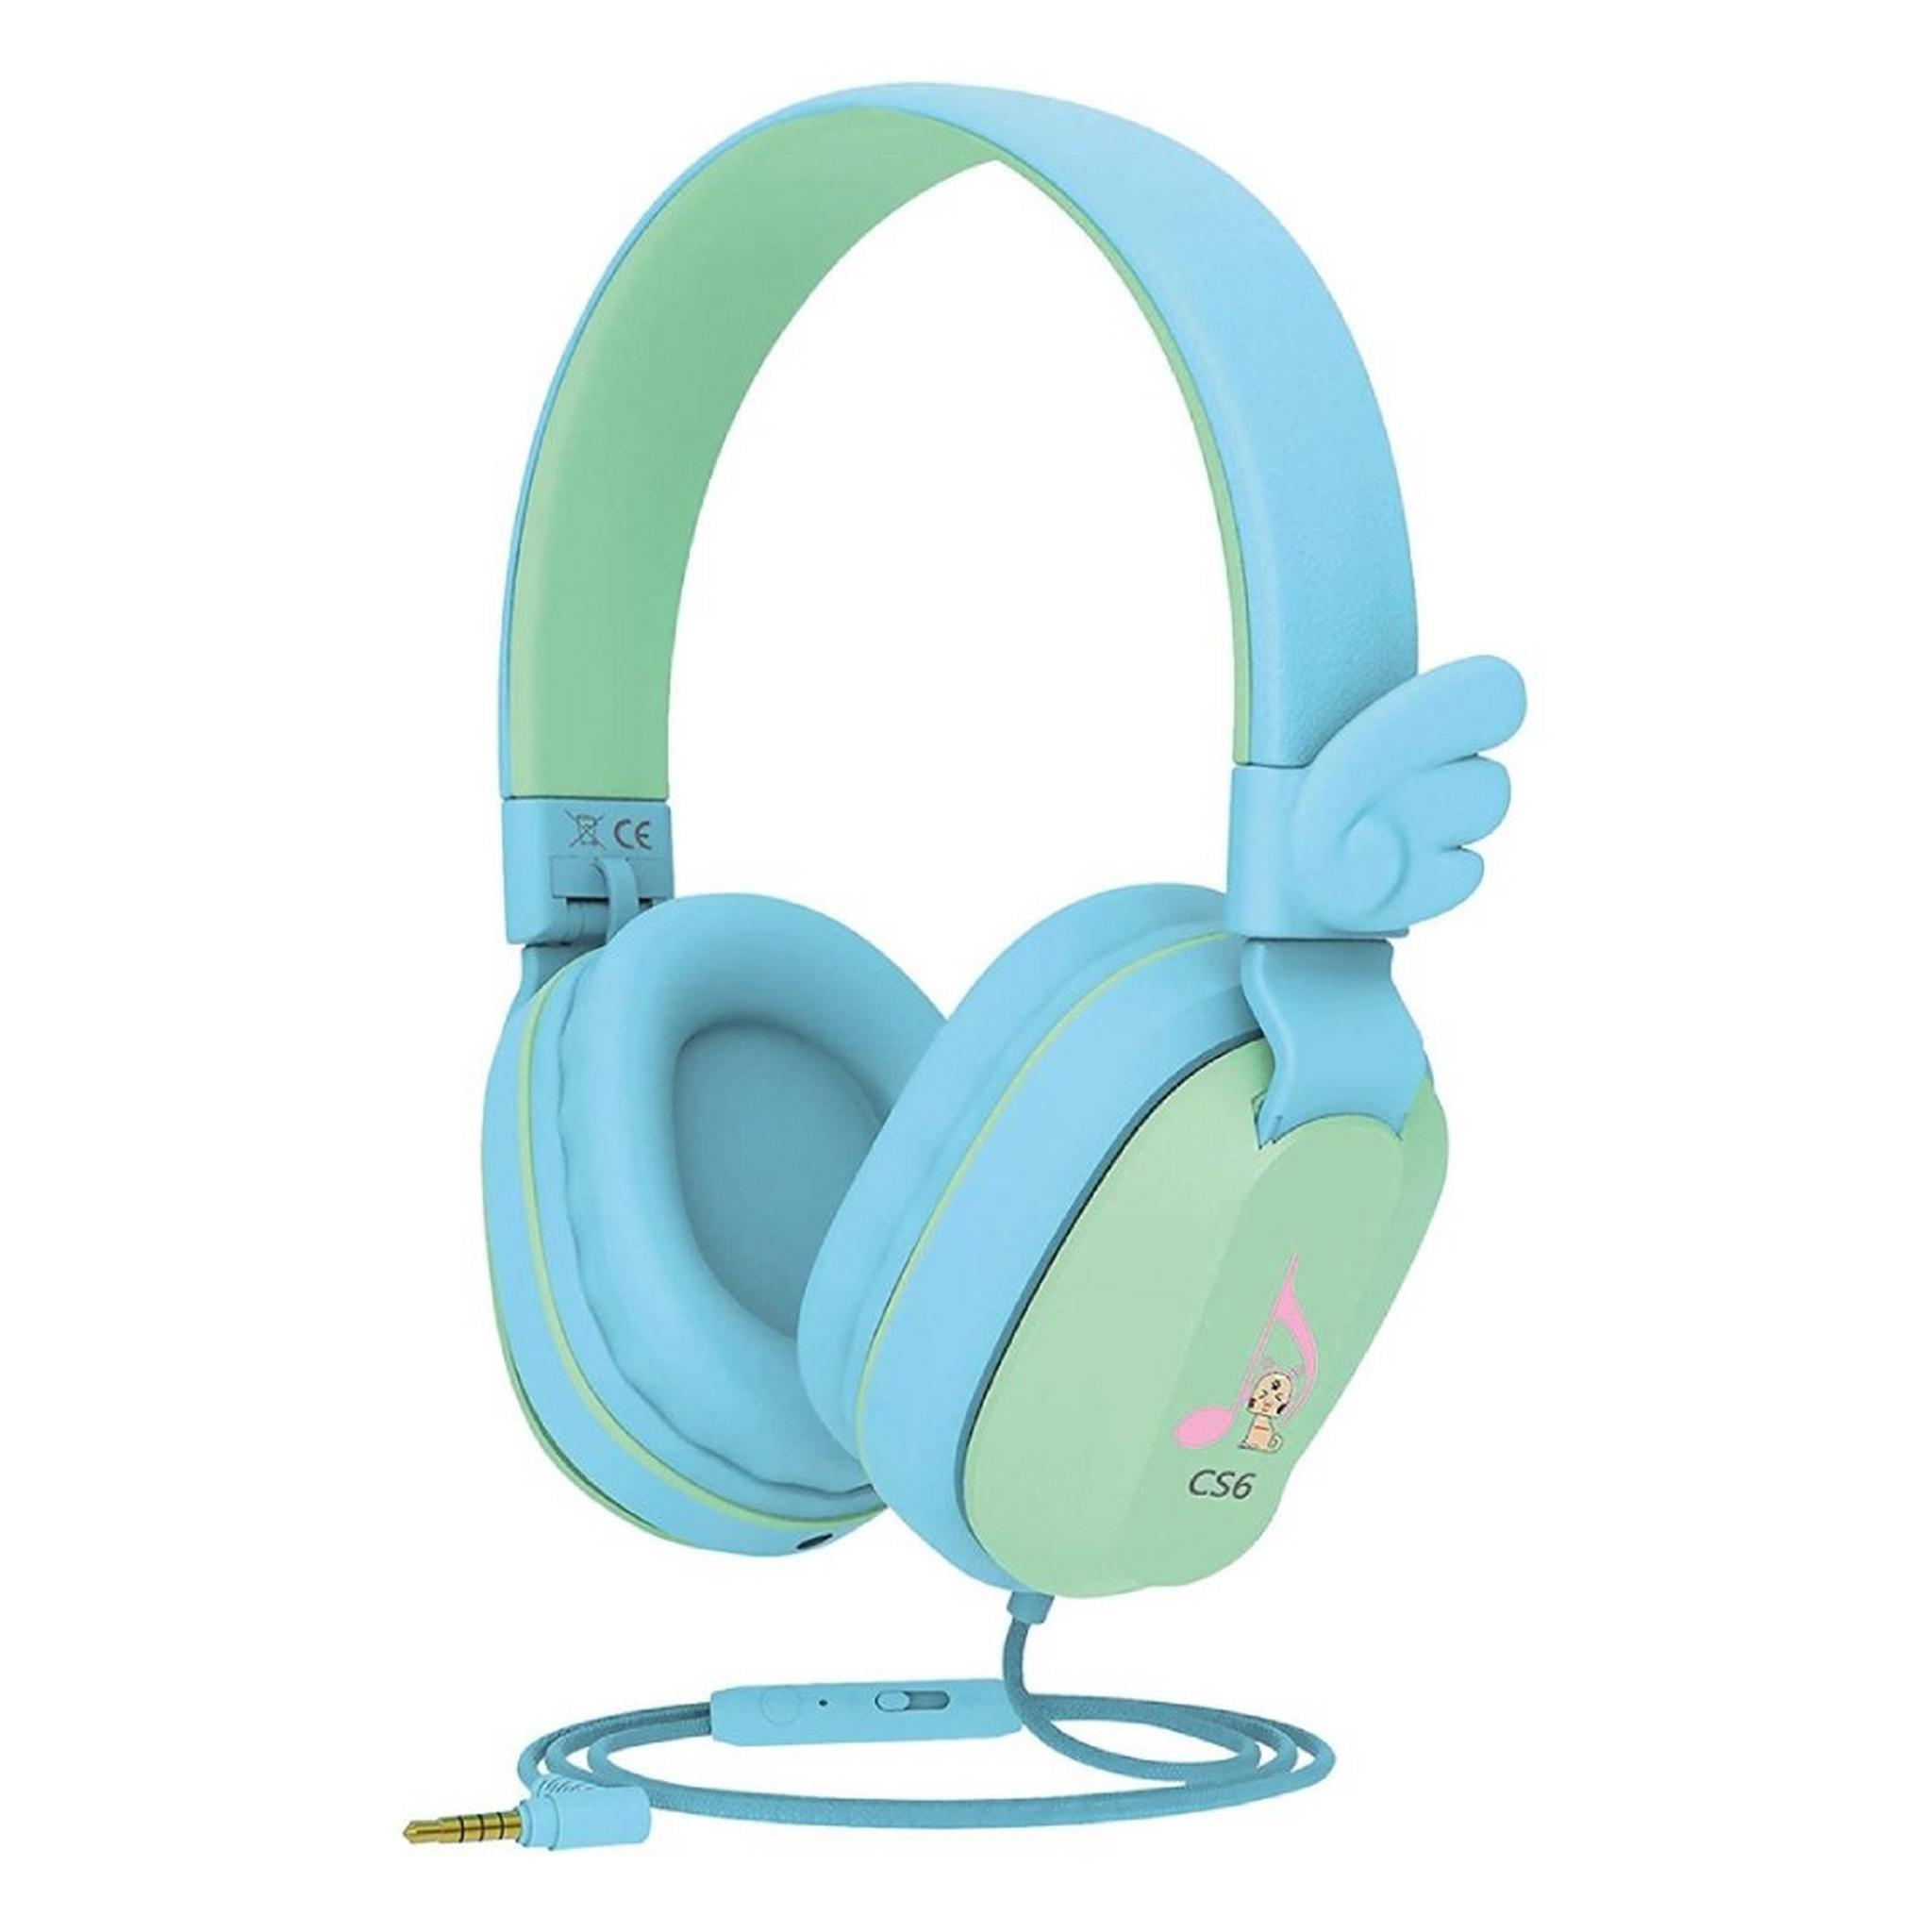 Riwbox Kids Wired Over-Ear Headphones - Blue/Green